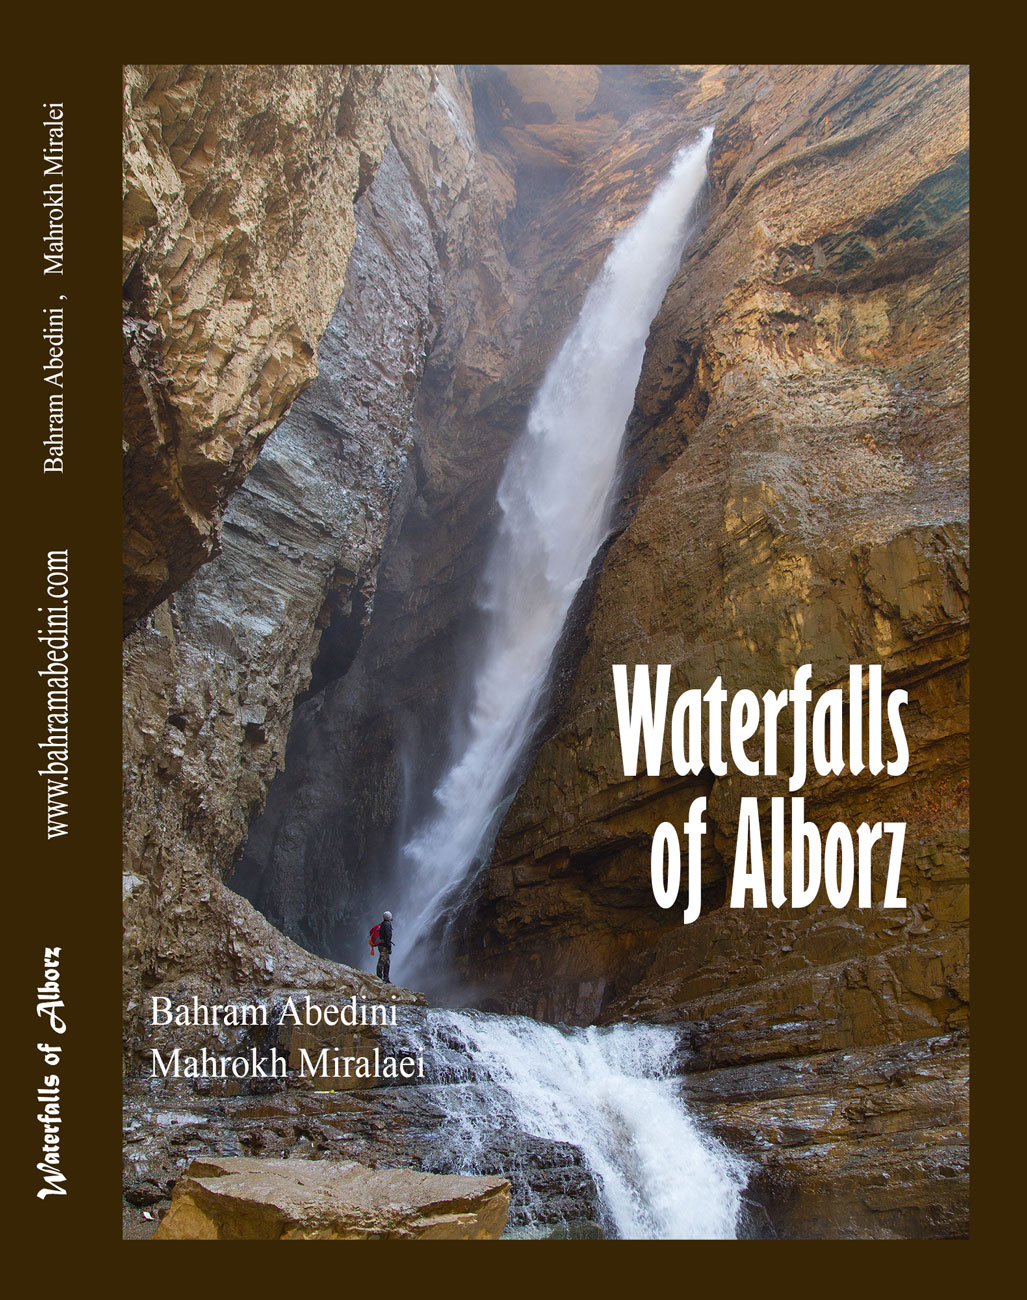 The Book of waterfalls of Alborz